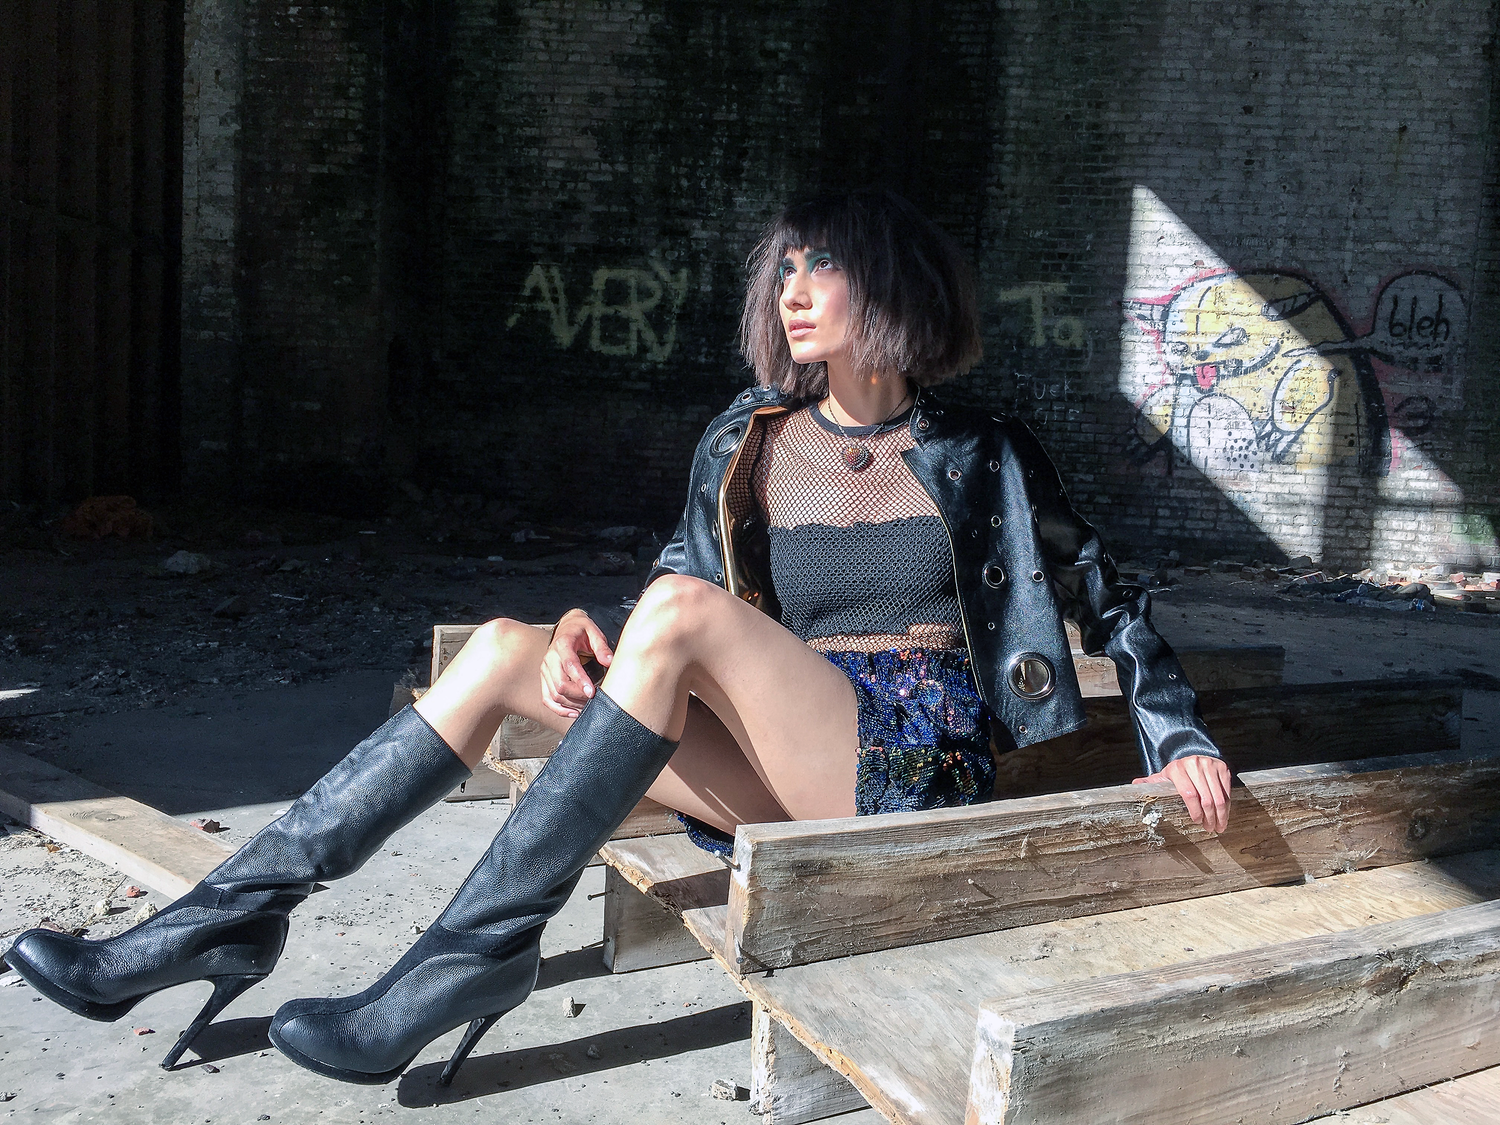 Model wearing a black tube top with a fishnet shirt underneath a leather jacket and thigh high boots. She is looking up towards the sun which catches the sparkle of the Bunny Paige Spiked and Paved Heart she's wearing around her neck.